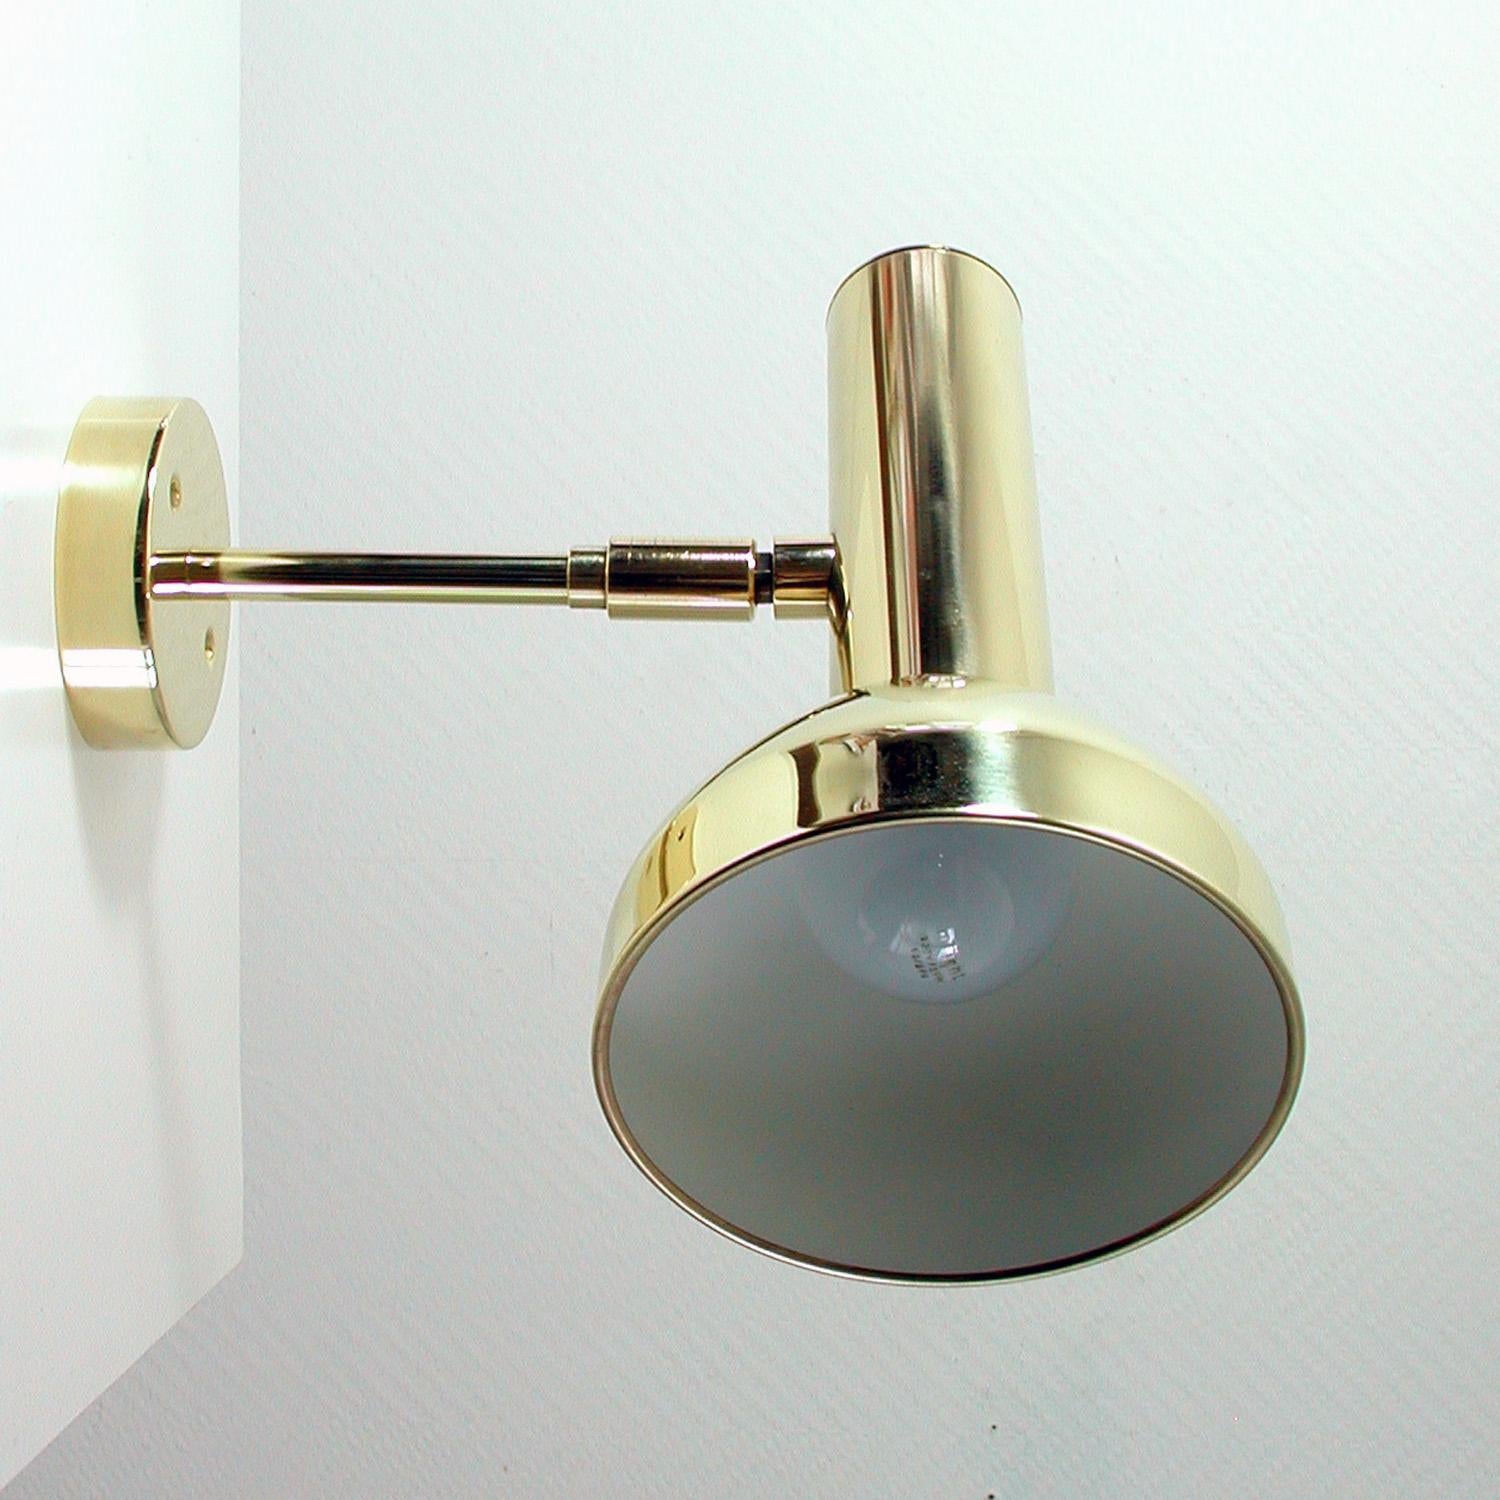 Midcentury German Brass Wall Light Sconce by Cosack, 1960s For Sale 1